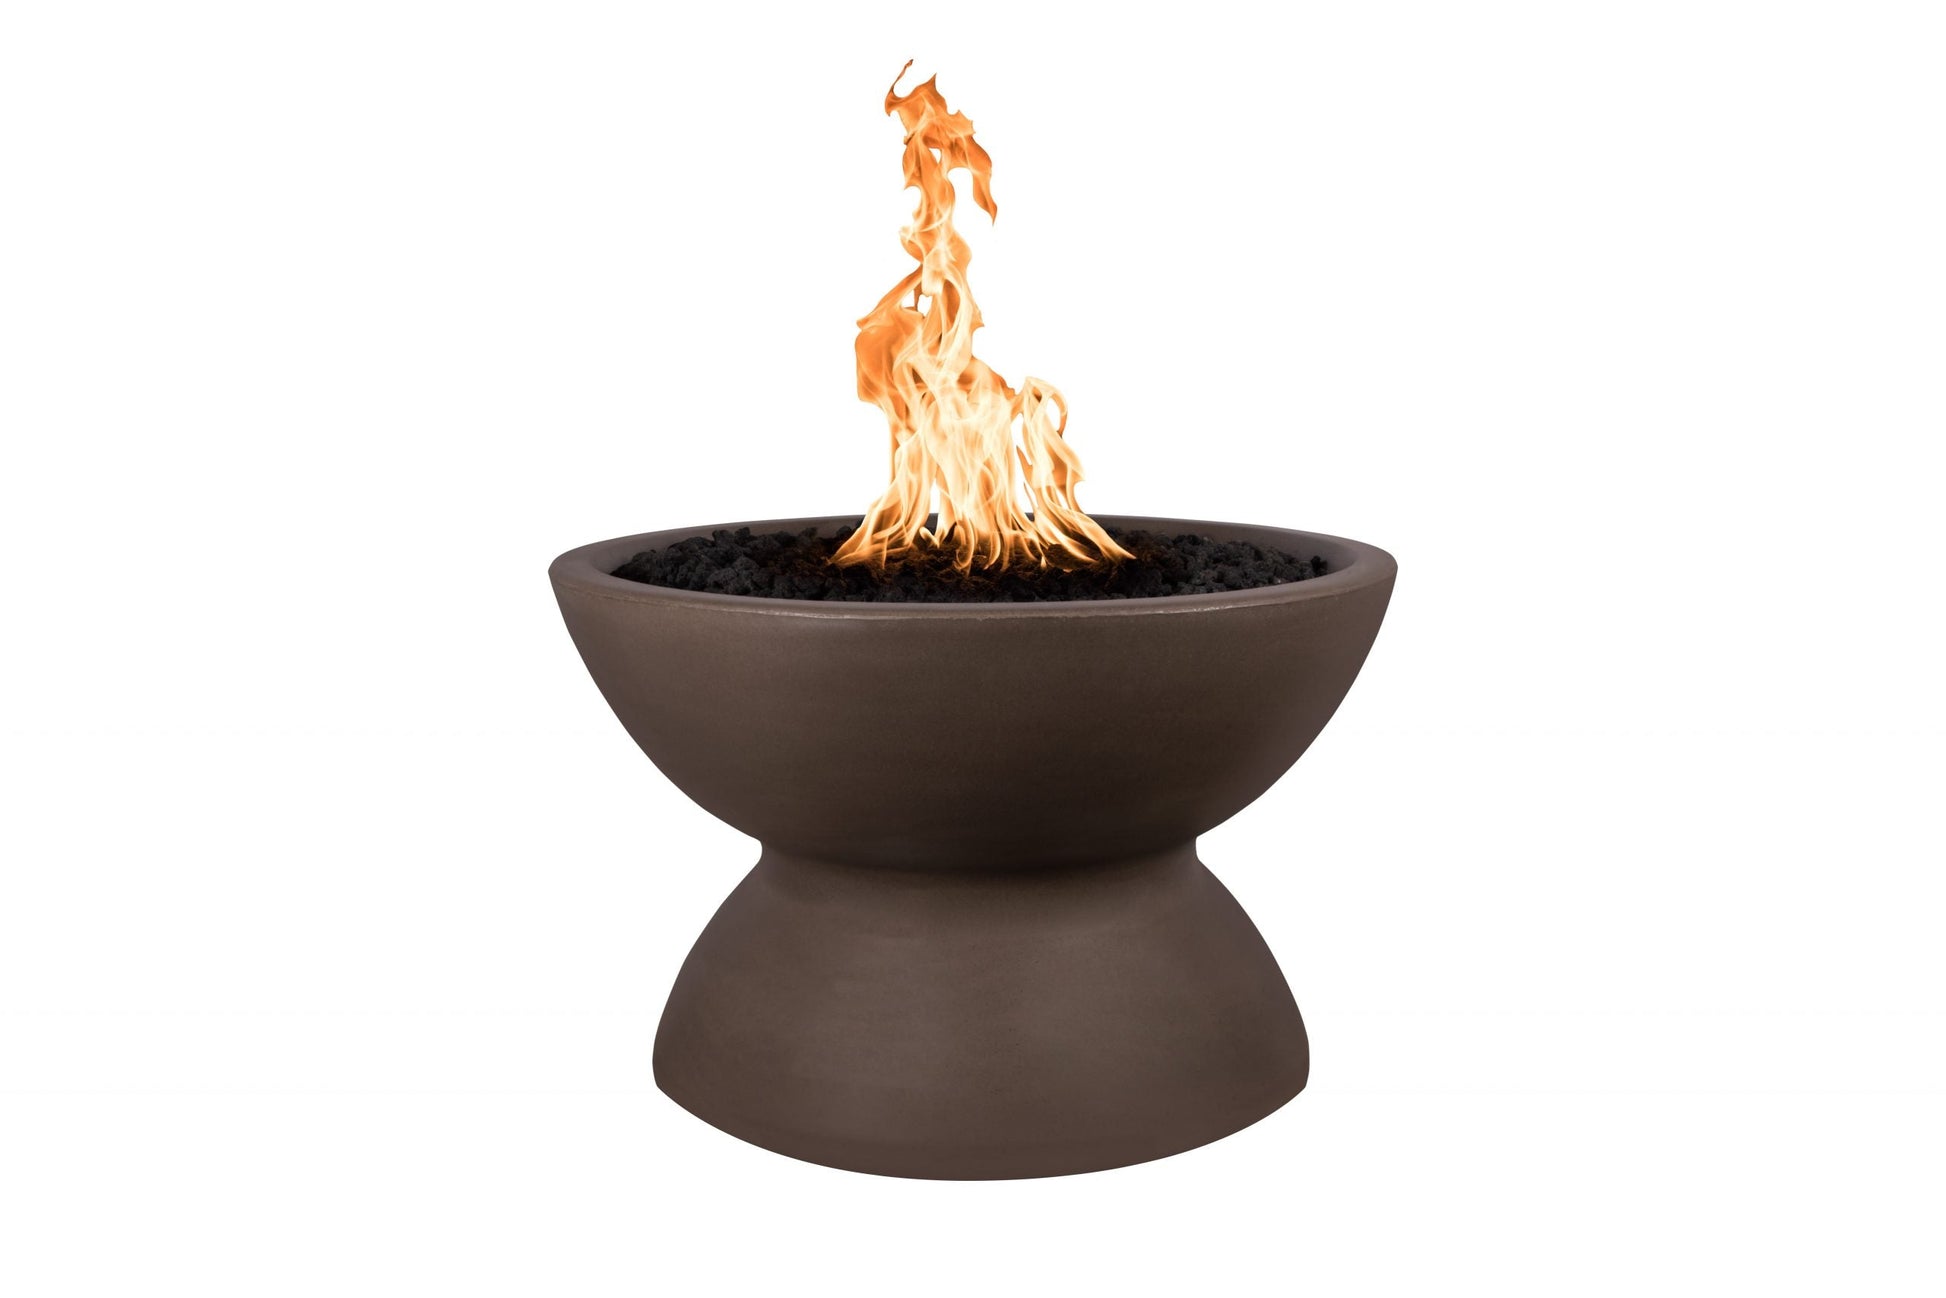 The Outdoor Plus Round Copa 33" Rustic Coffee GFRC Concrete Liquid Propane Fire Pit with Match Lit Ignition